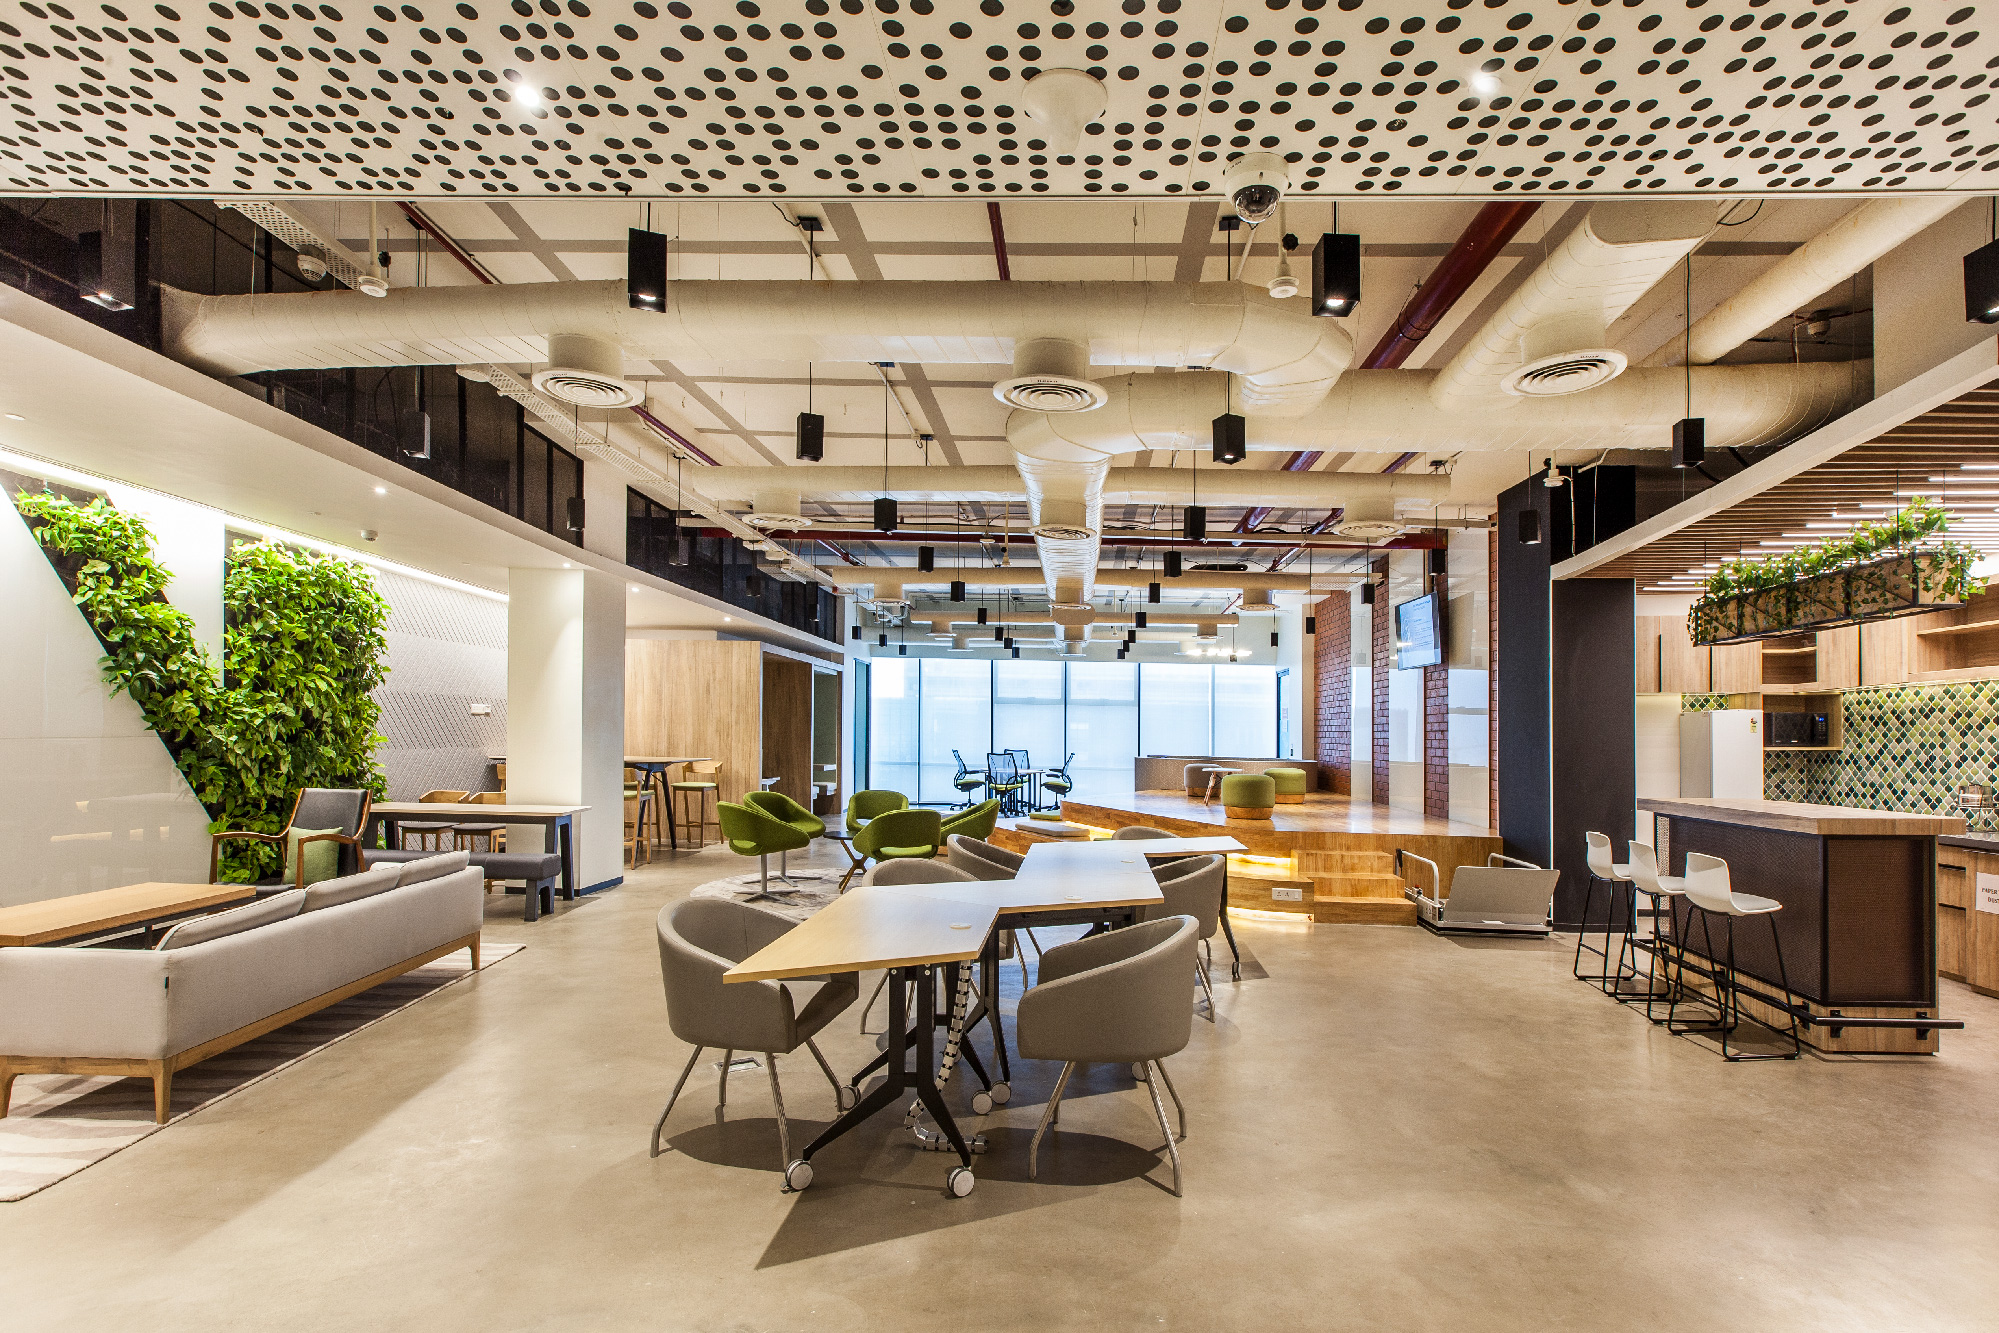 Collaborative Workspace at Northern Trust: LEED V4 Certified Office with Height-Adjustable Components